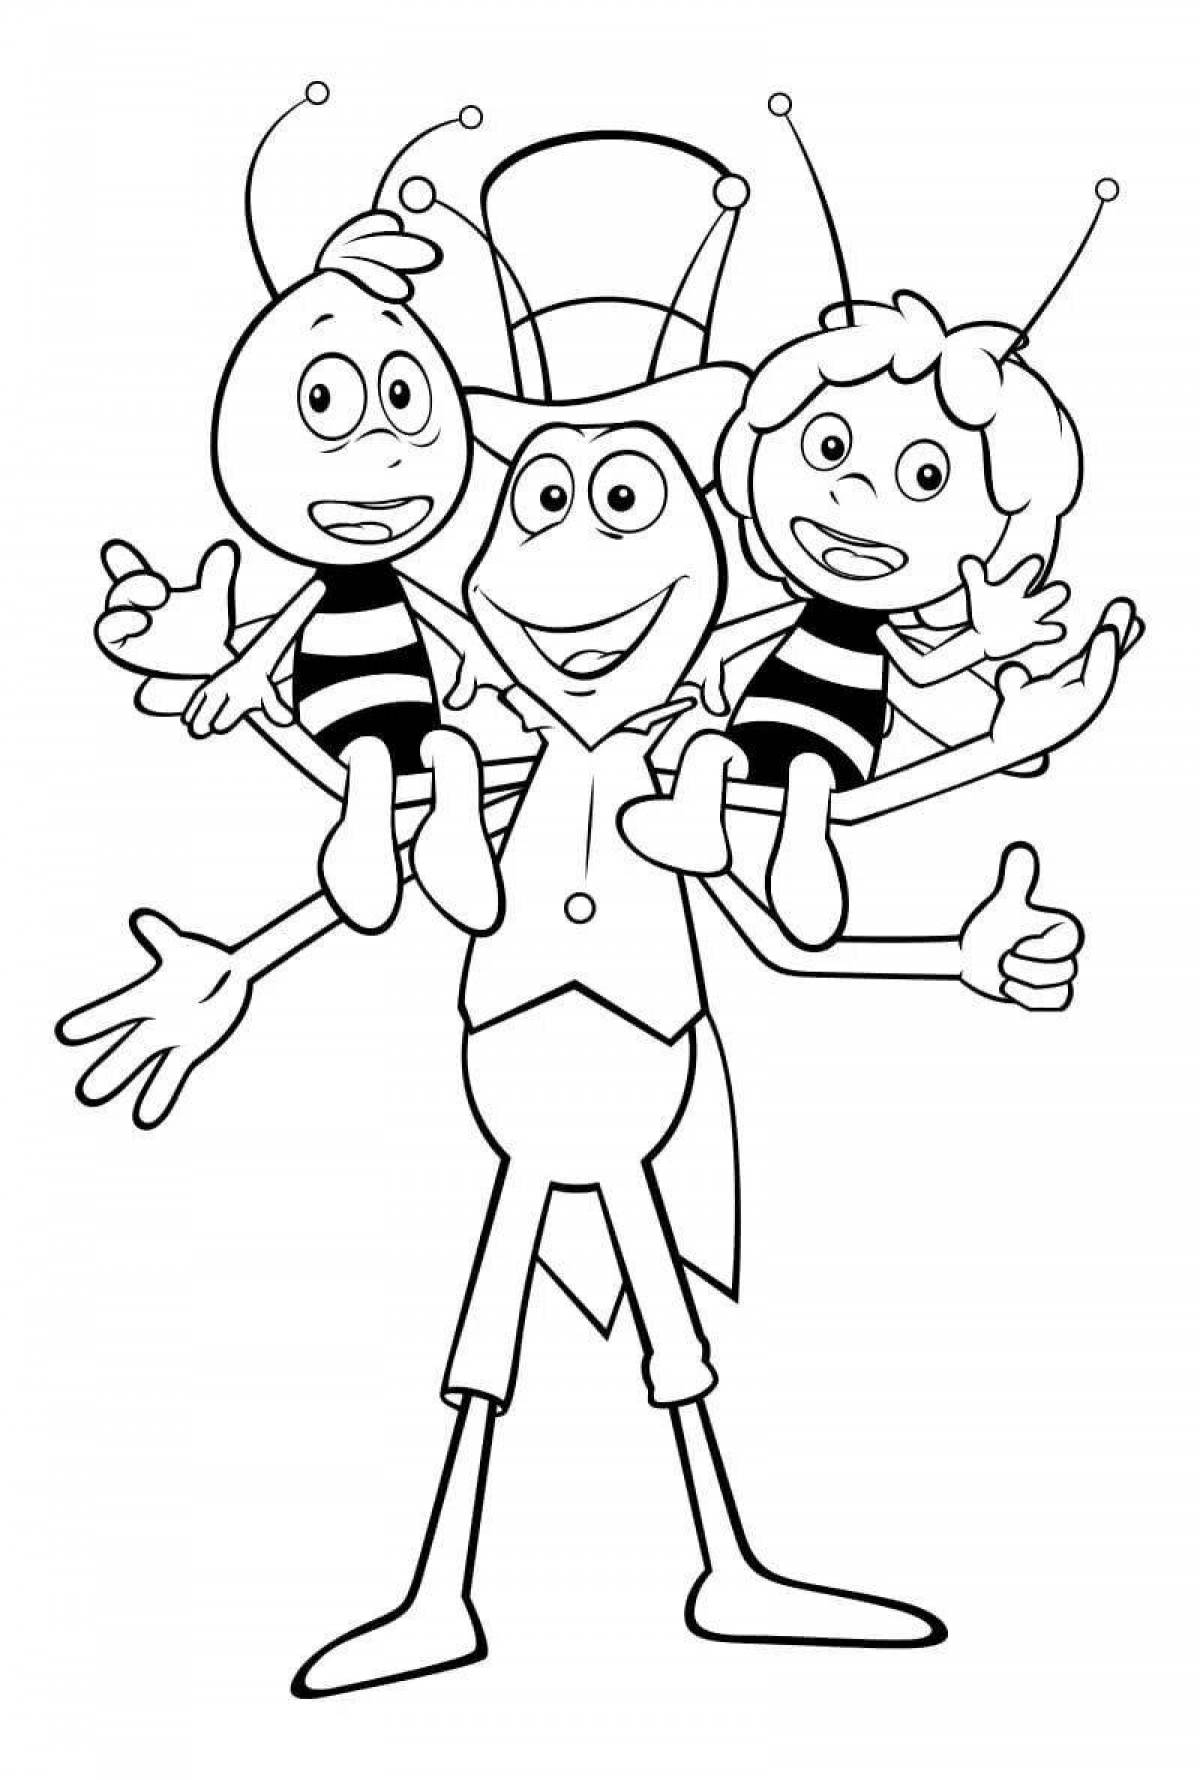 Colorific maya bee coloring page for kids